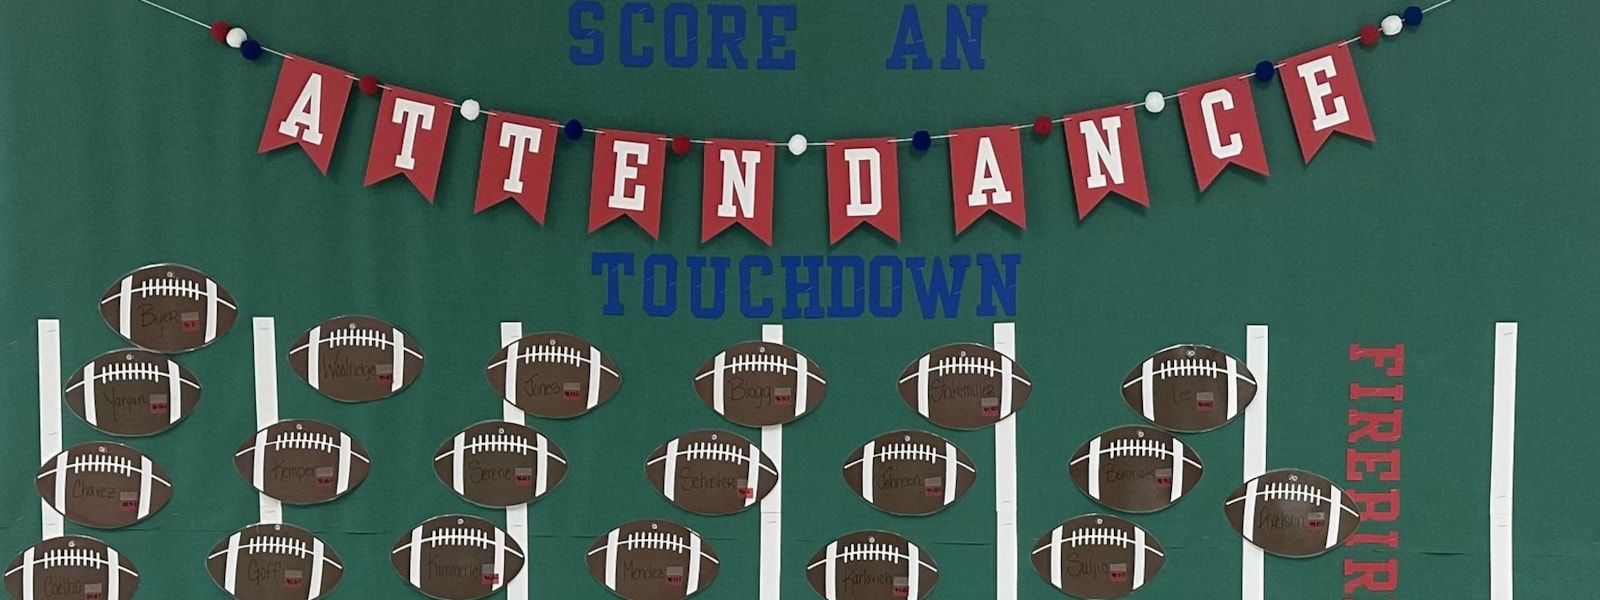 Bulletin Board with score a touchdown wording and footballs 